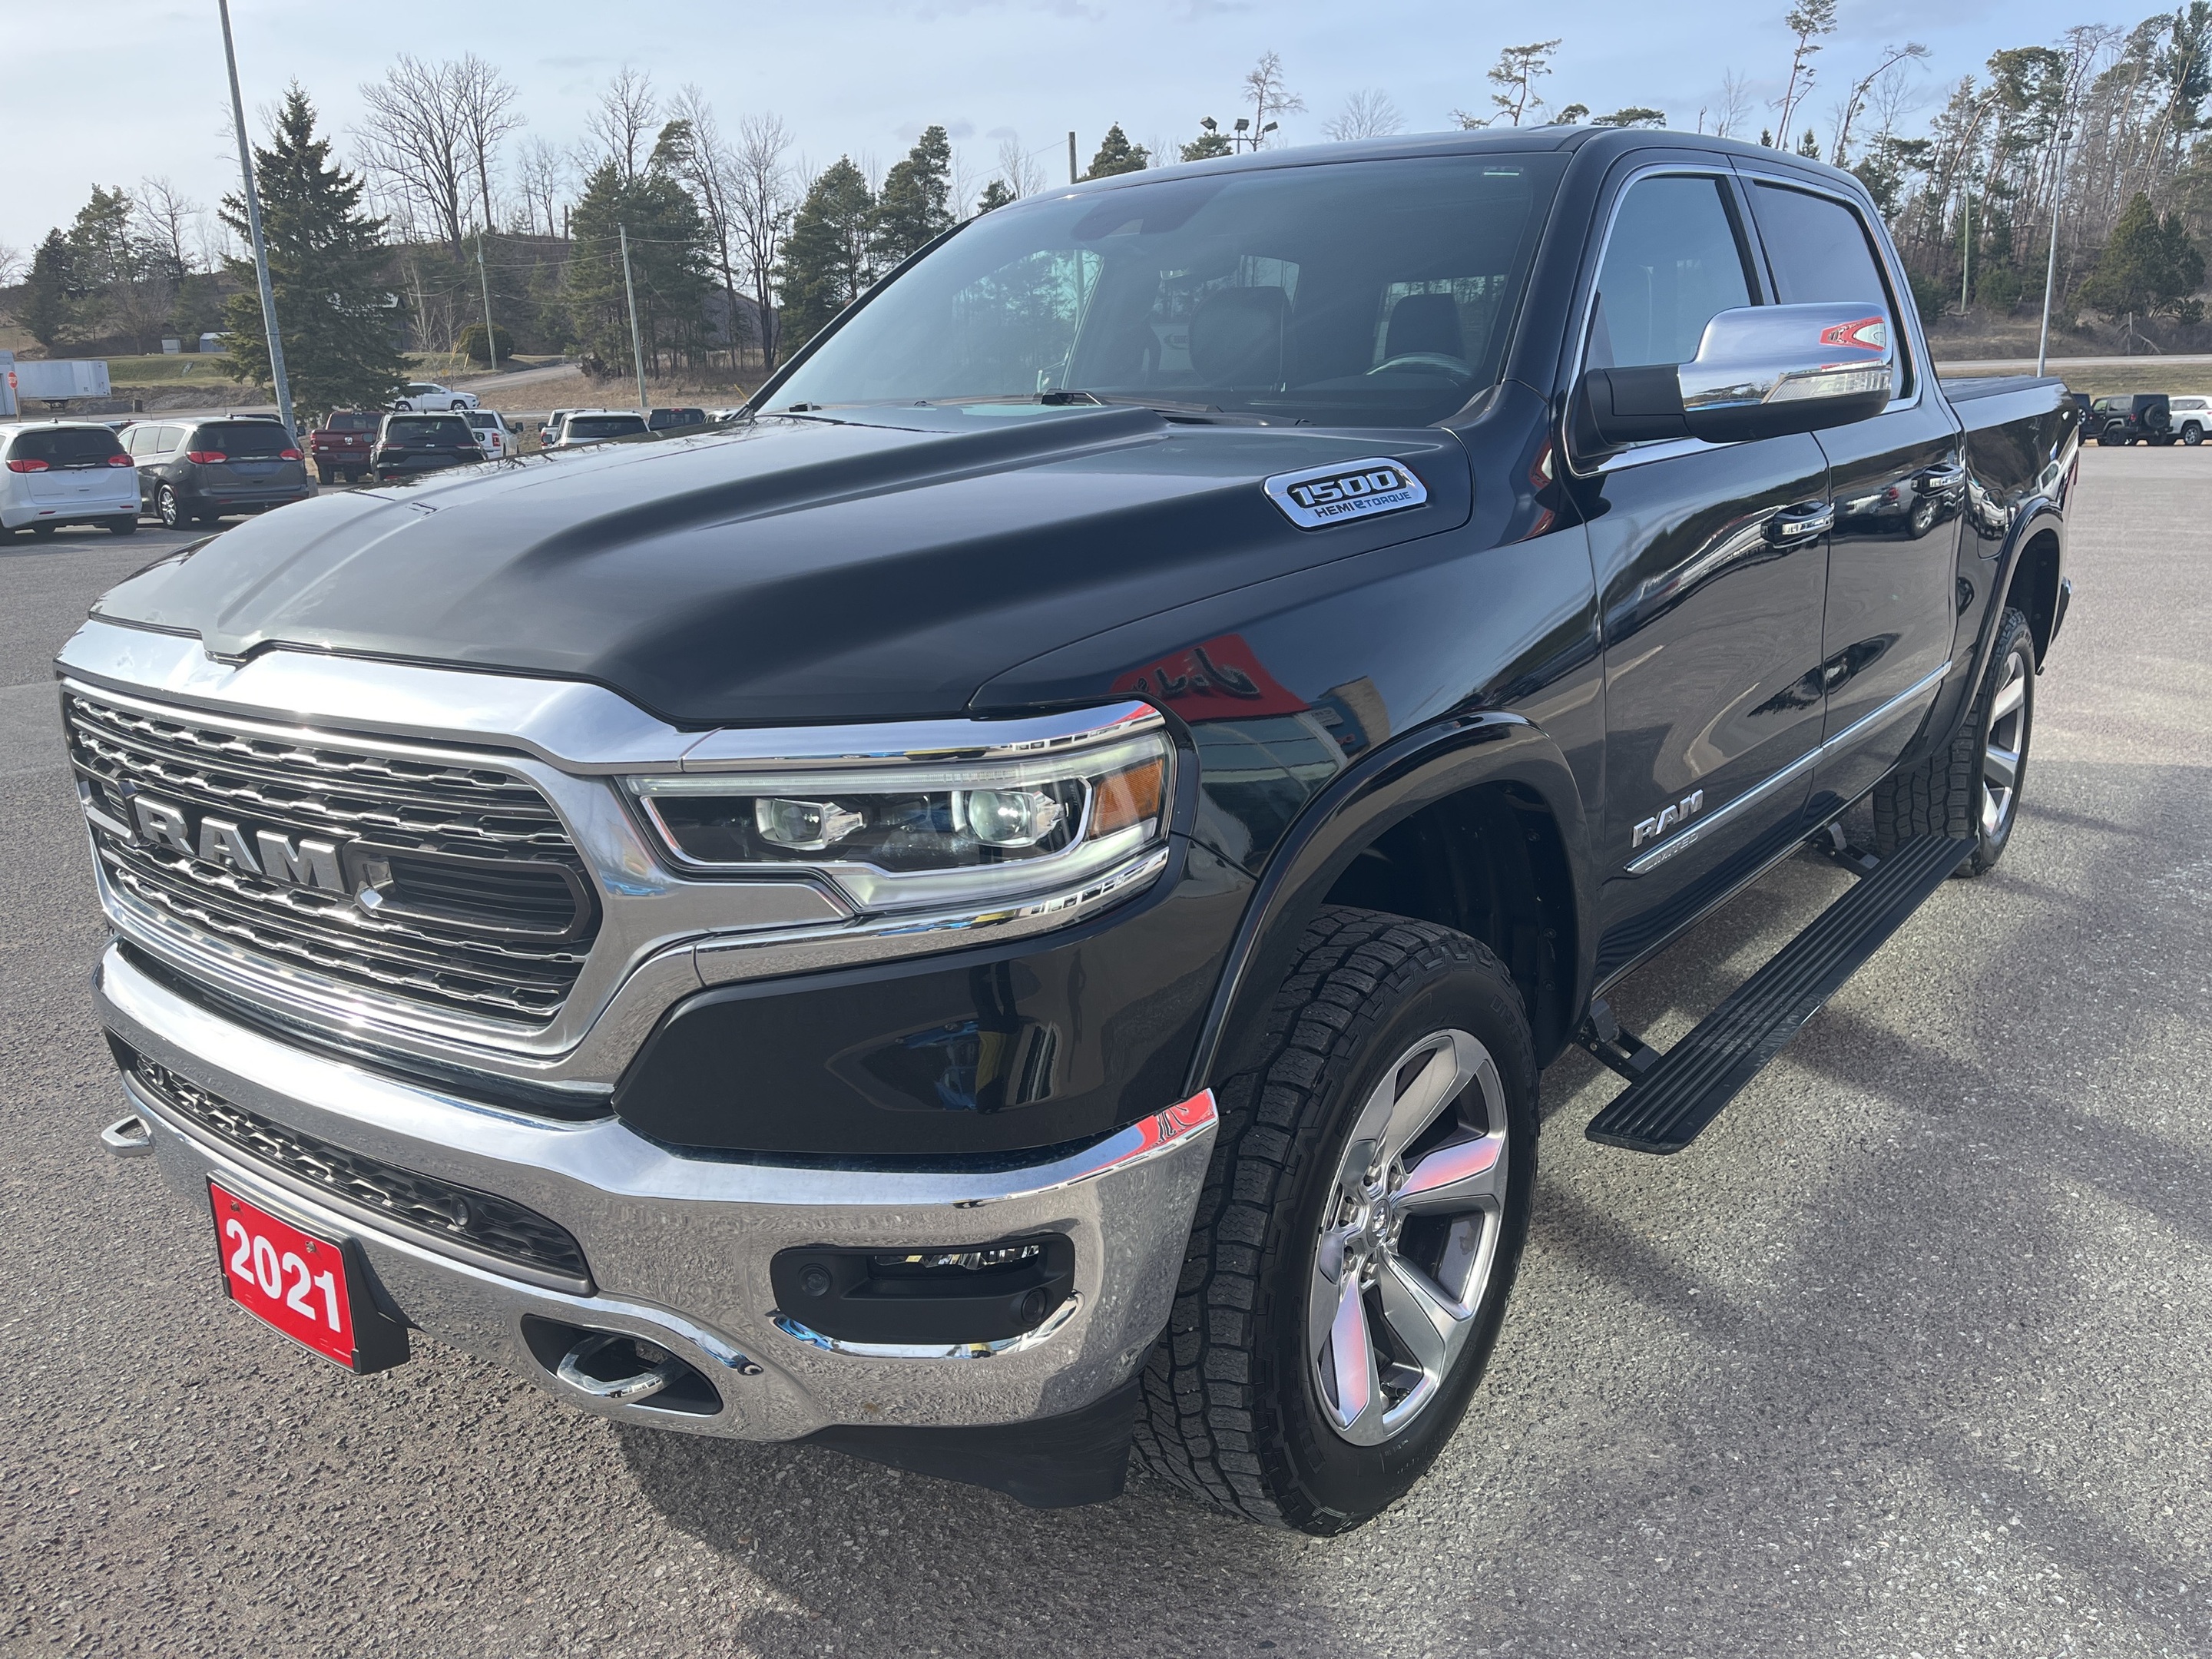 2021 Ram 1500 Limited - Panoramic Sunroof - Park Assist